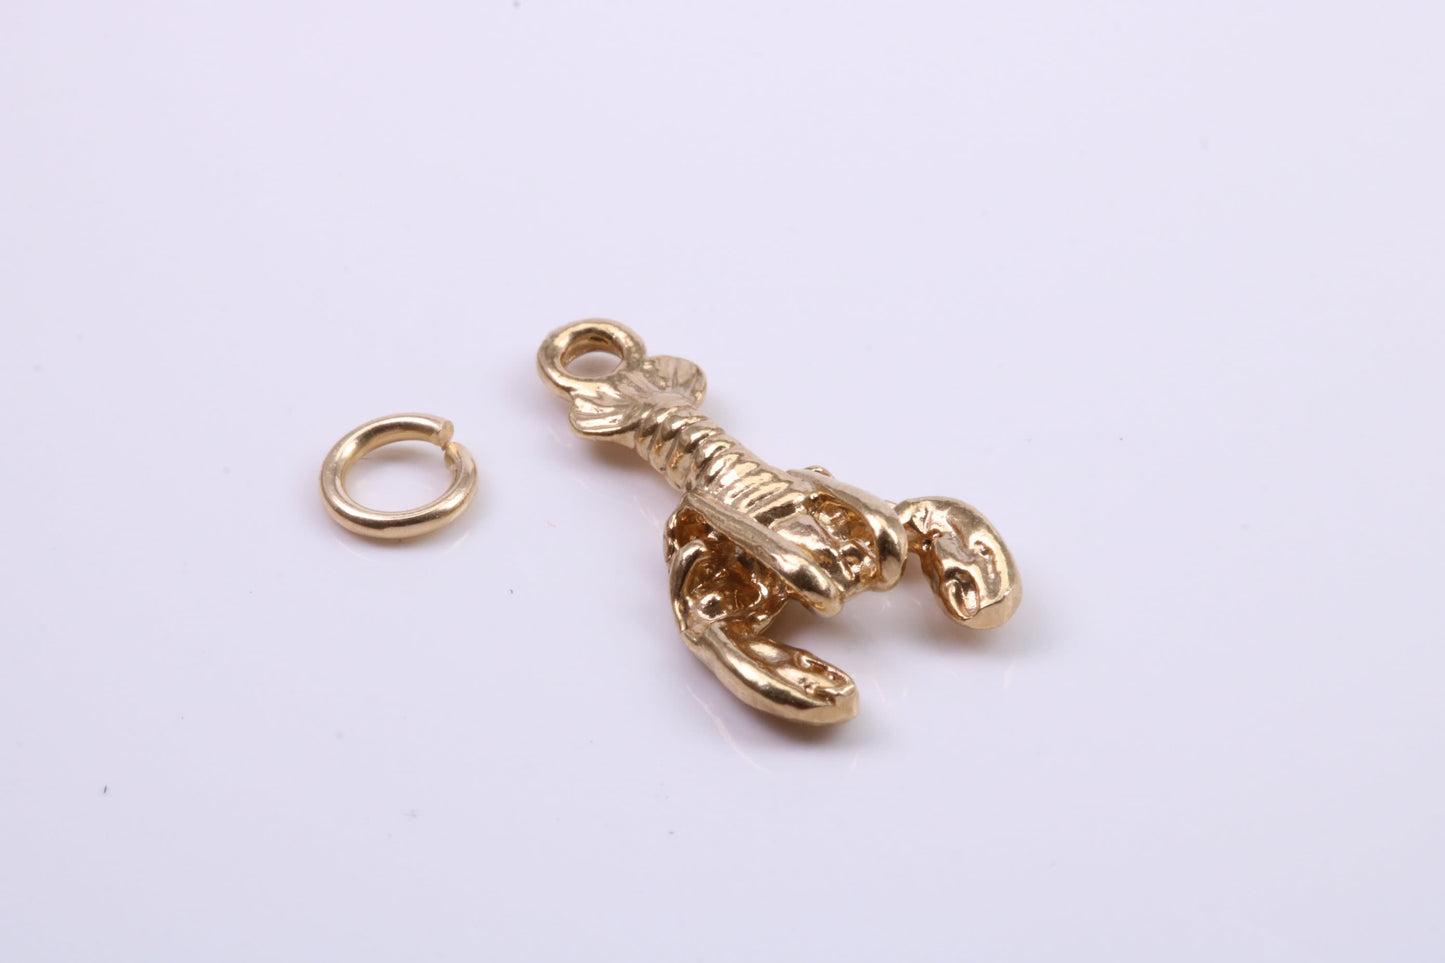 Lobster Charm, Traditional Charm, Made from Solid 9ct Yellow Gold, British Hallmarked, Complete with Attachment Link